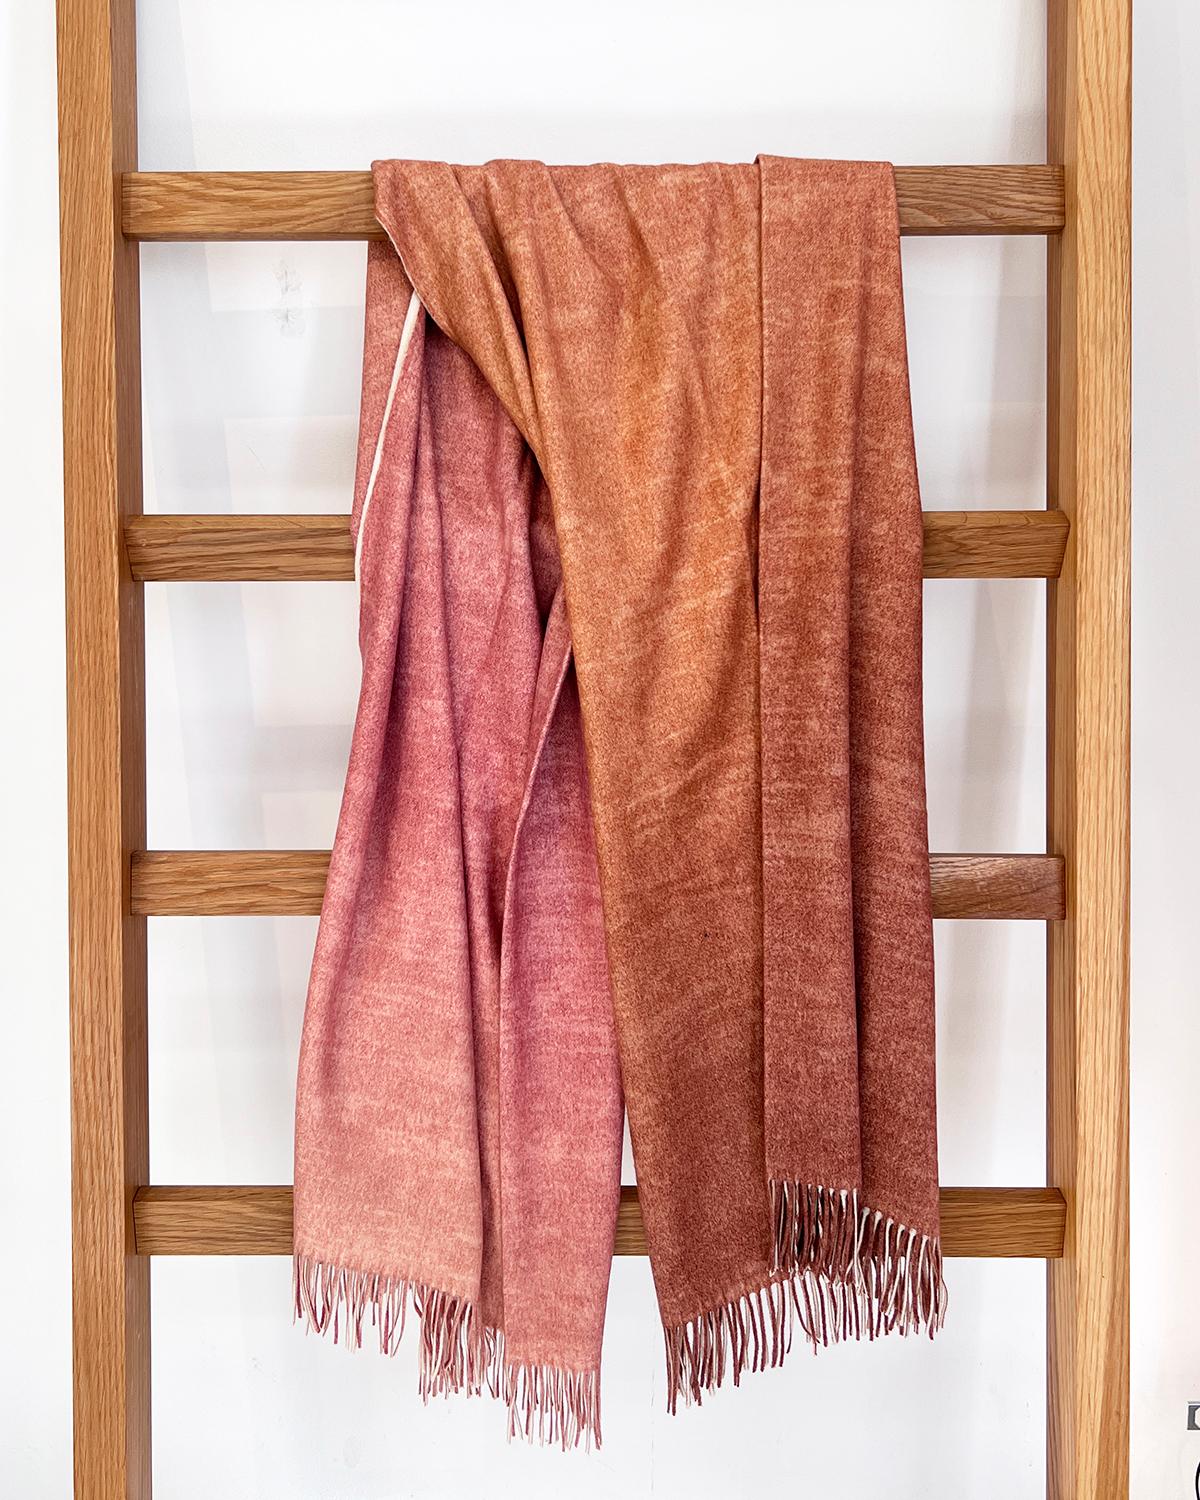 Hand-Woven Ombre Merino Wool Soft Blanket Throw in Rosewood Red, in Stock